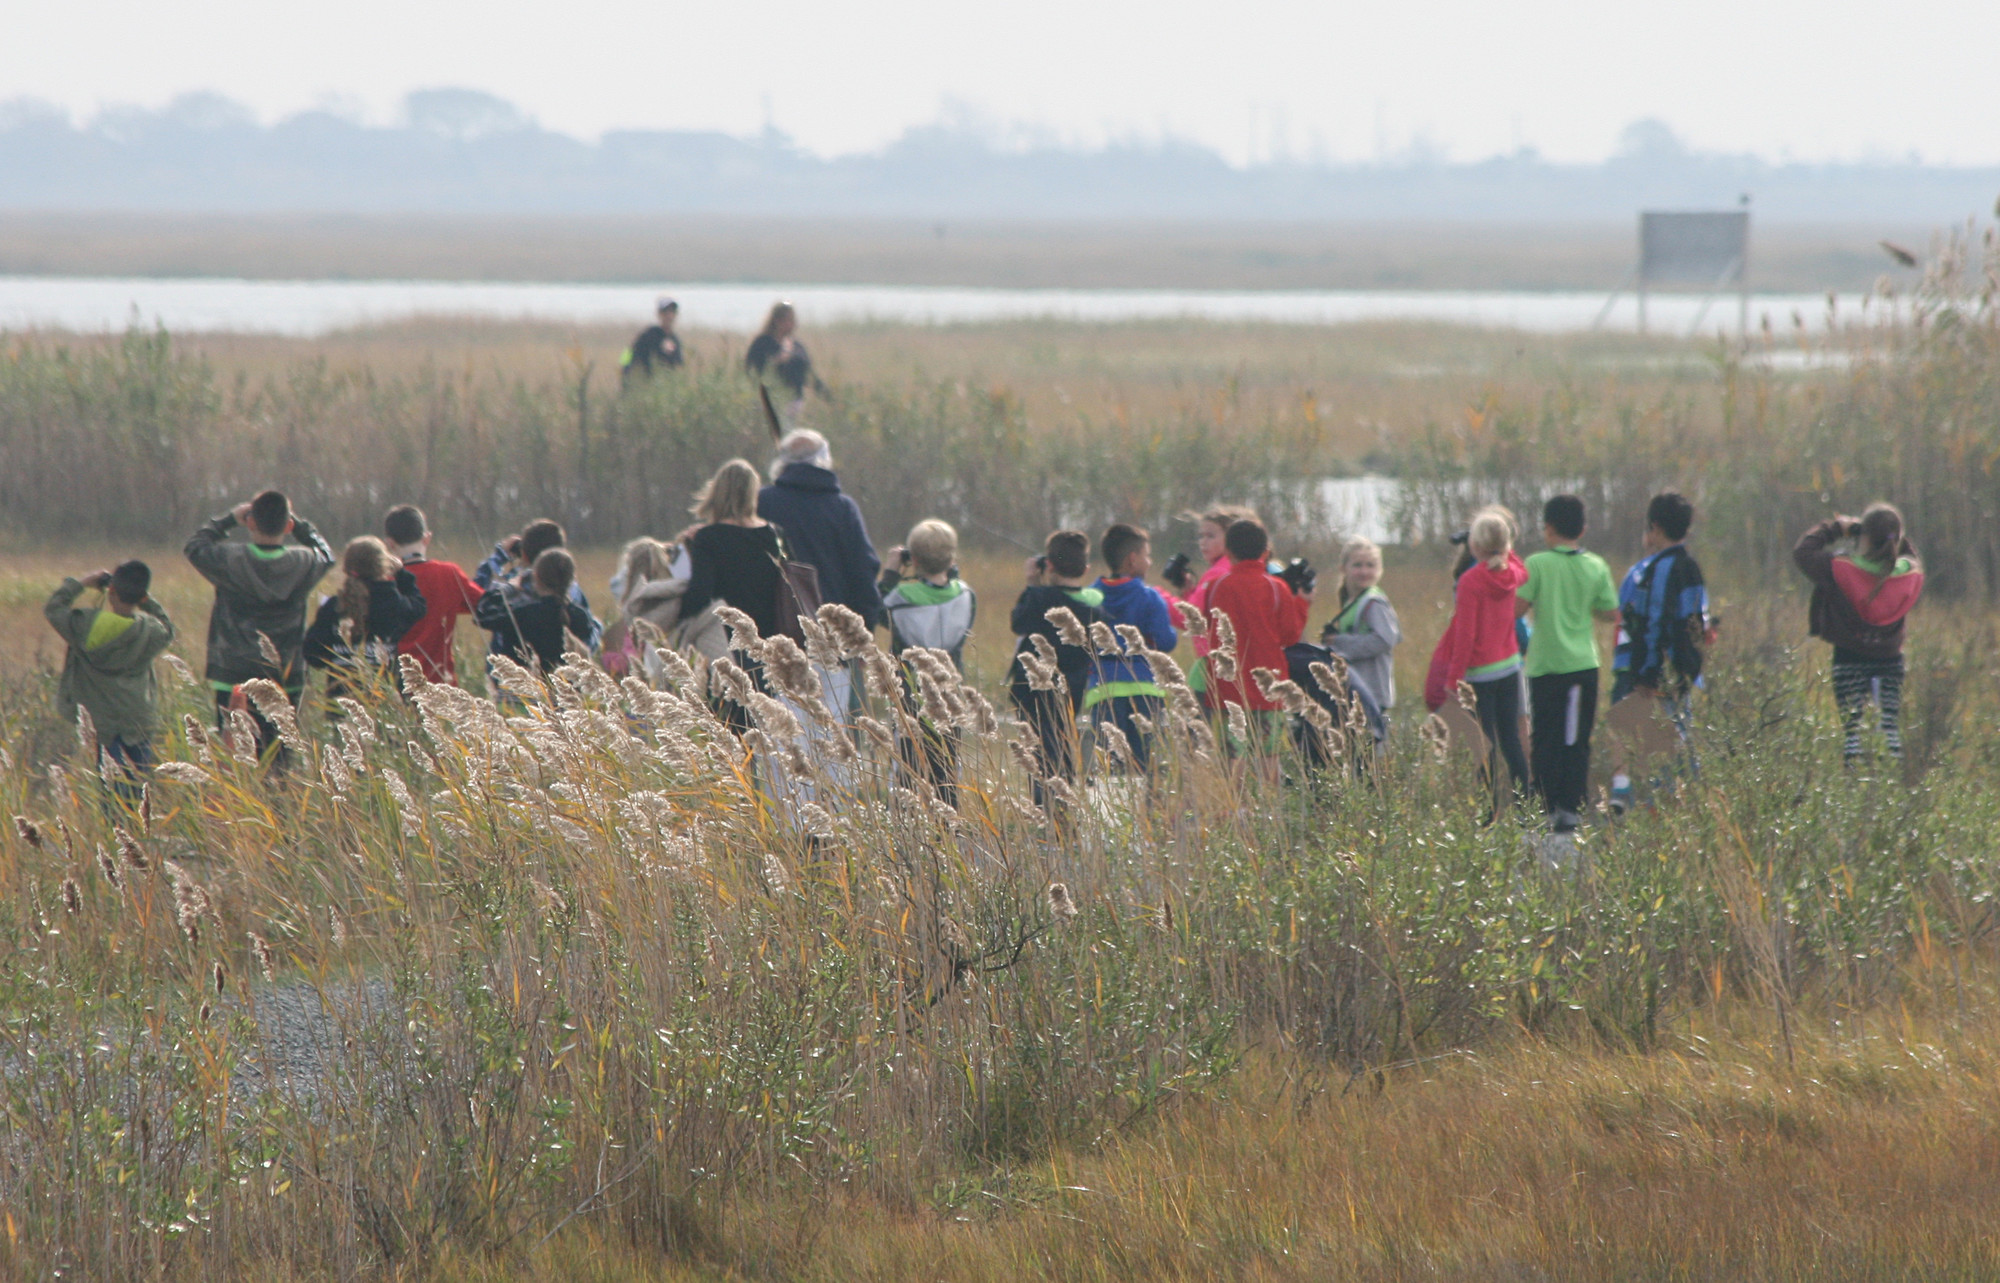 School #3 students observed wildlife at the Oceanside Marine Nature Study Area.